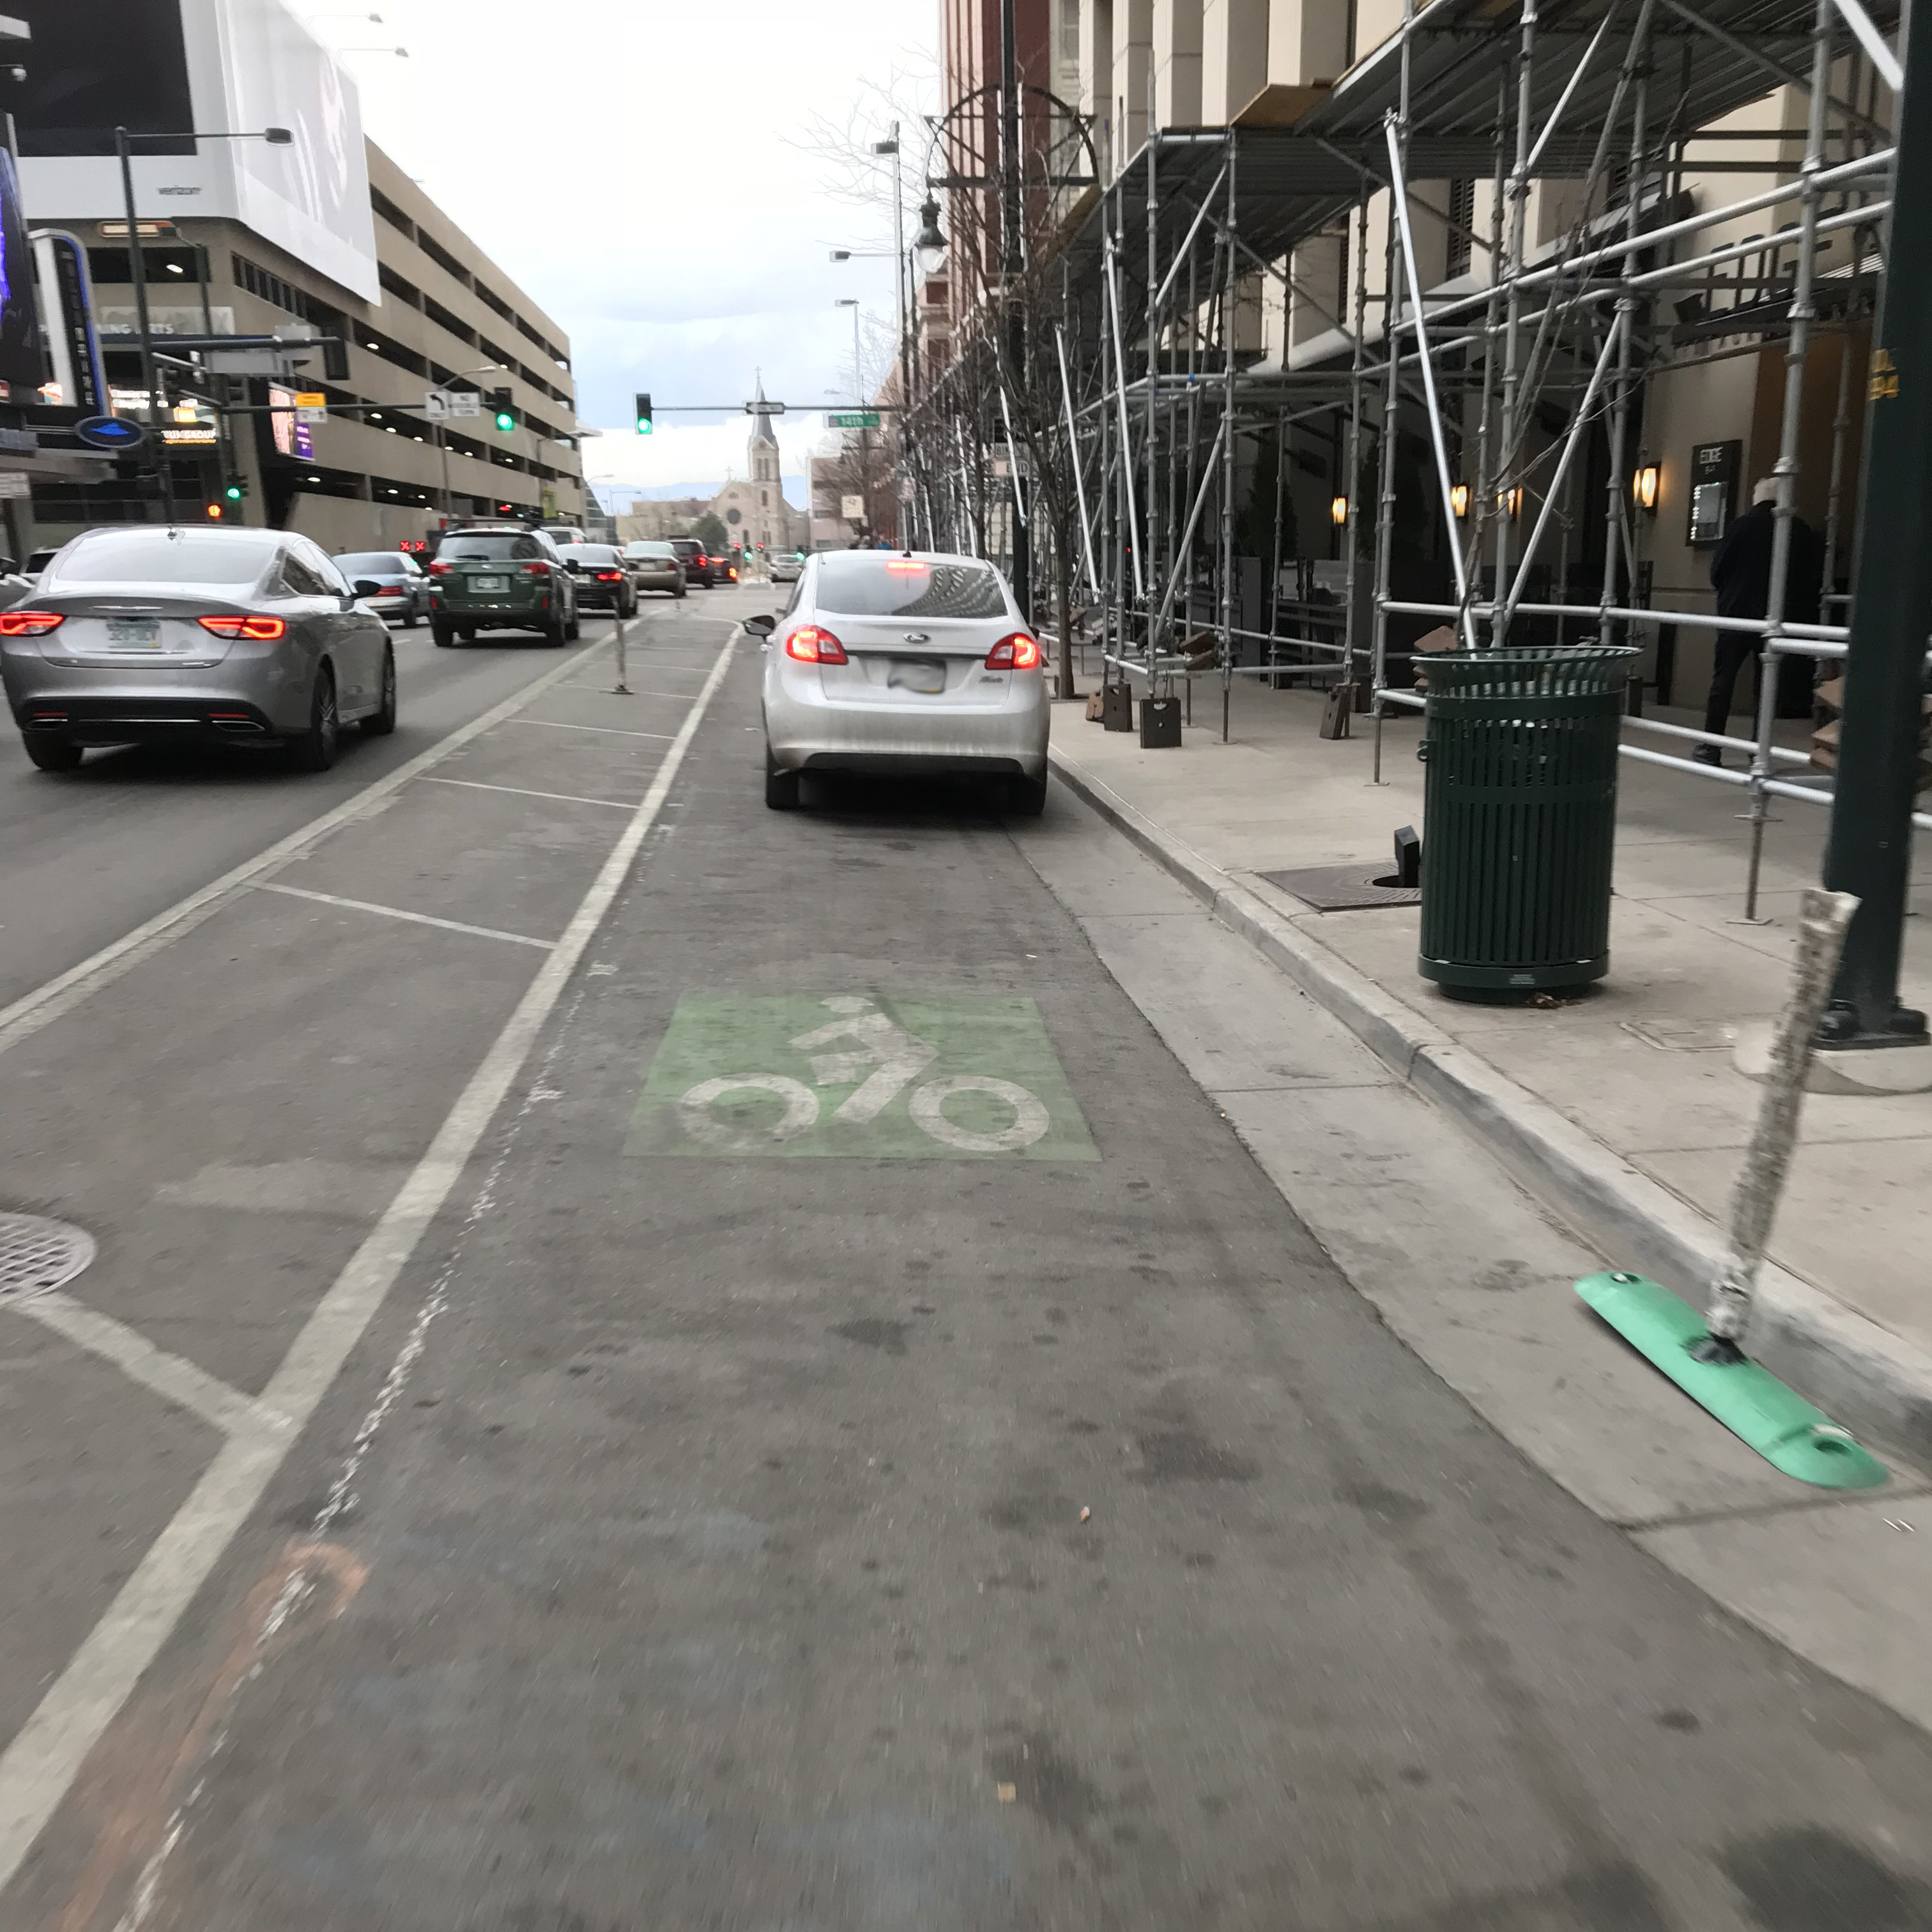 A car parked in the bike lane of a city.